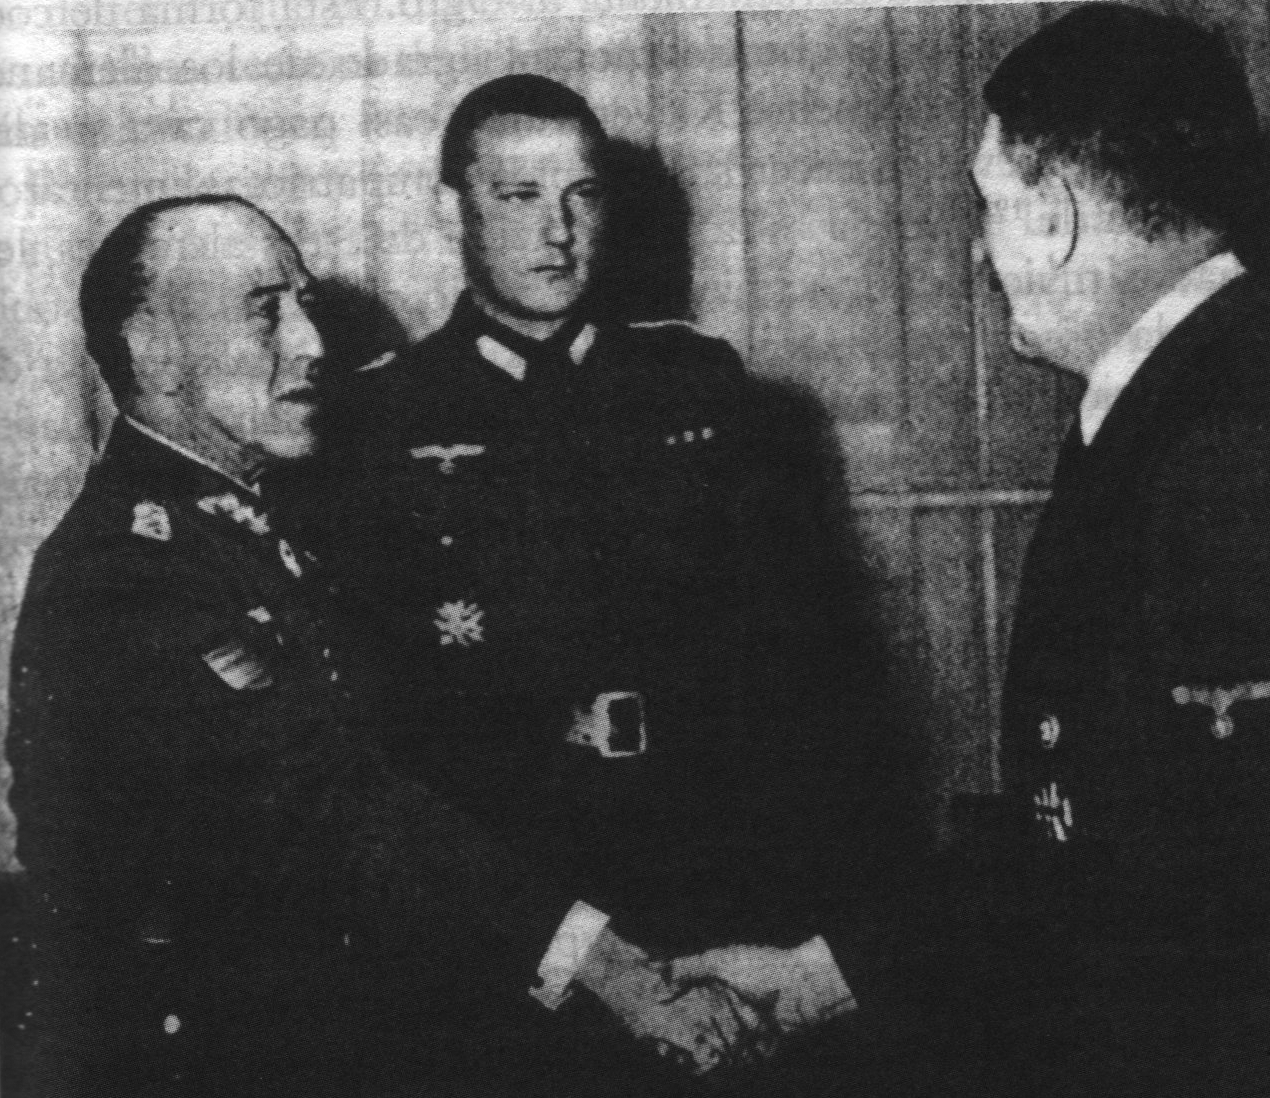 Spanish Army General Esteban Infantes shaking hands with Adolf Hitler, date unknown